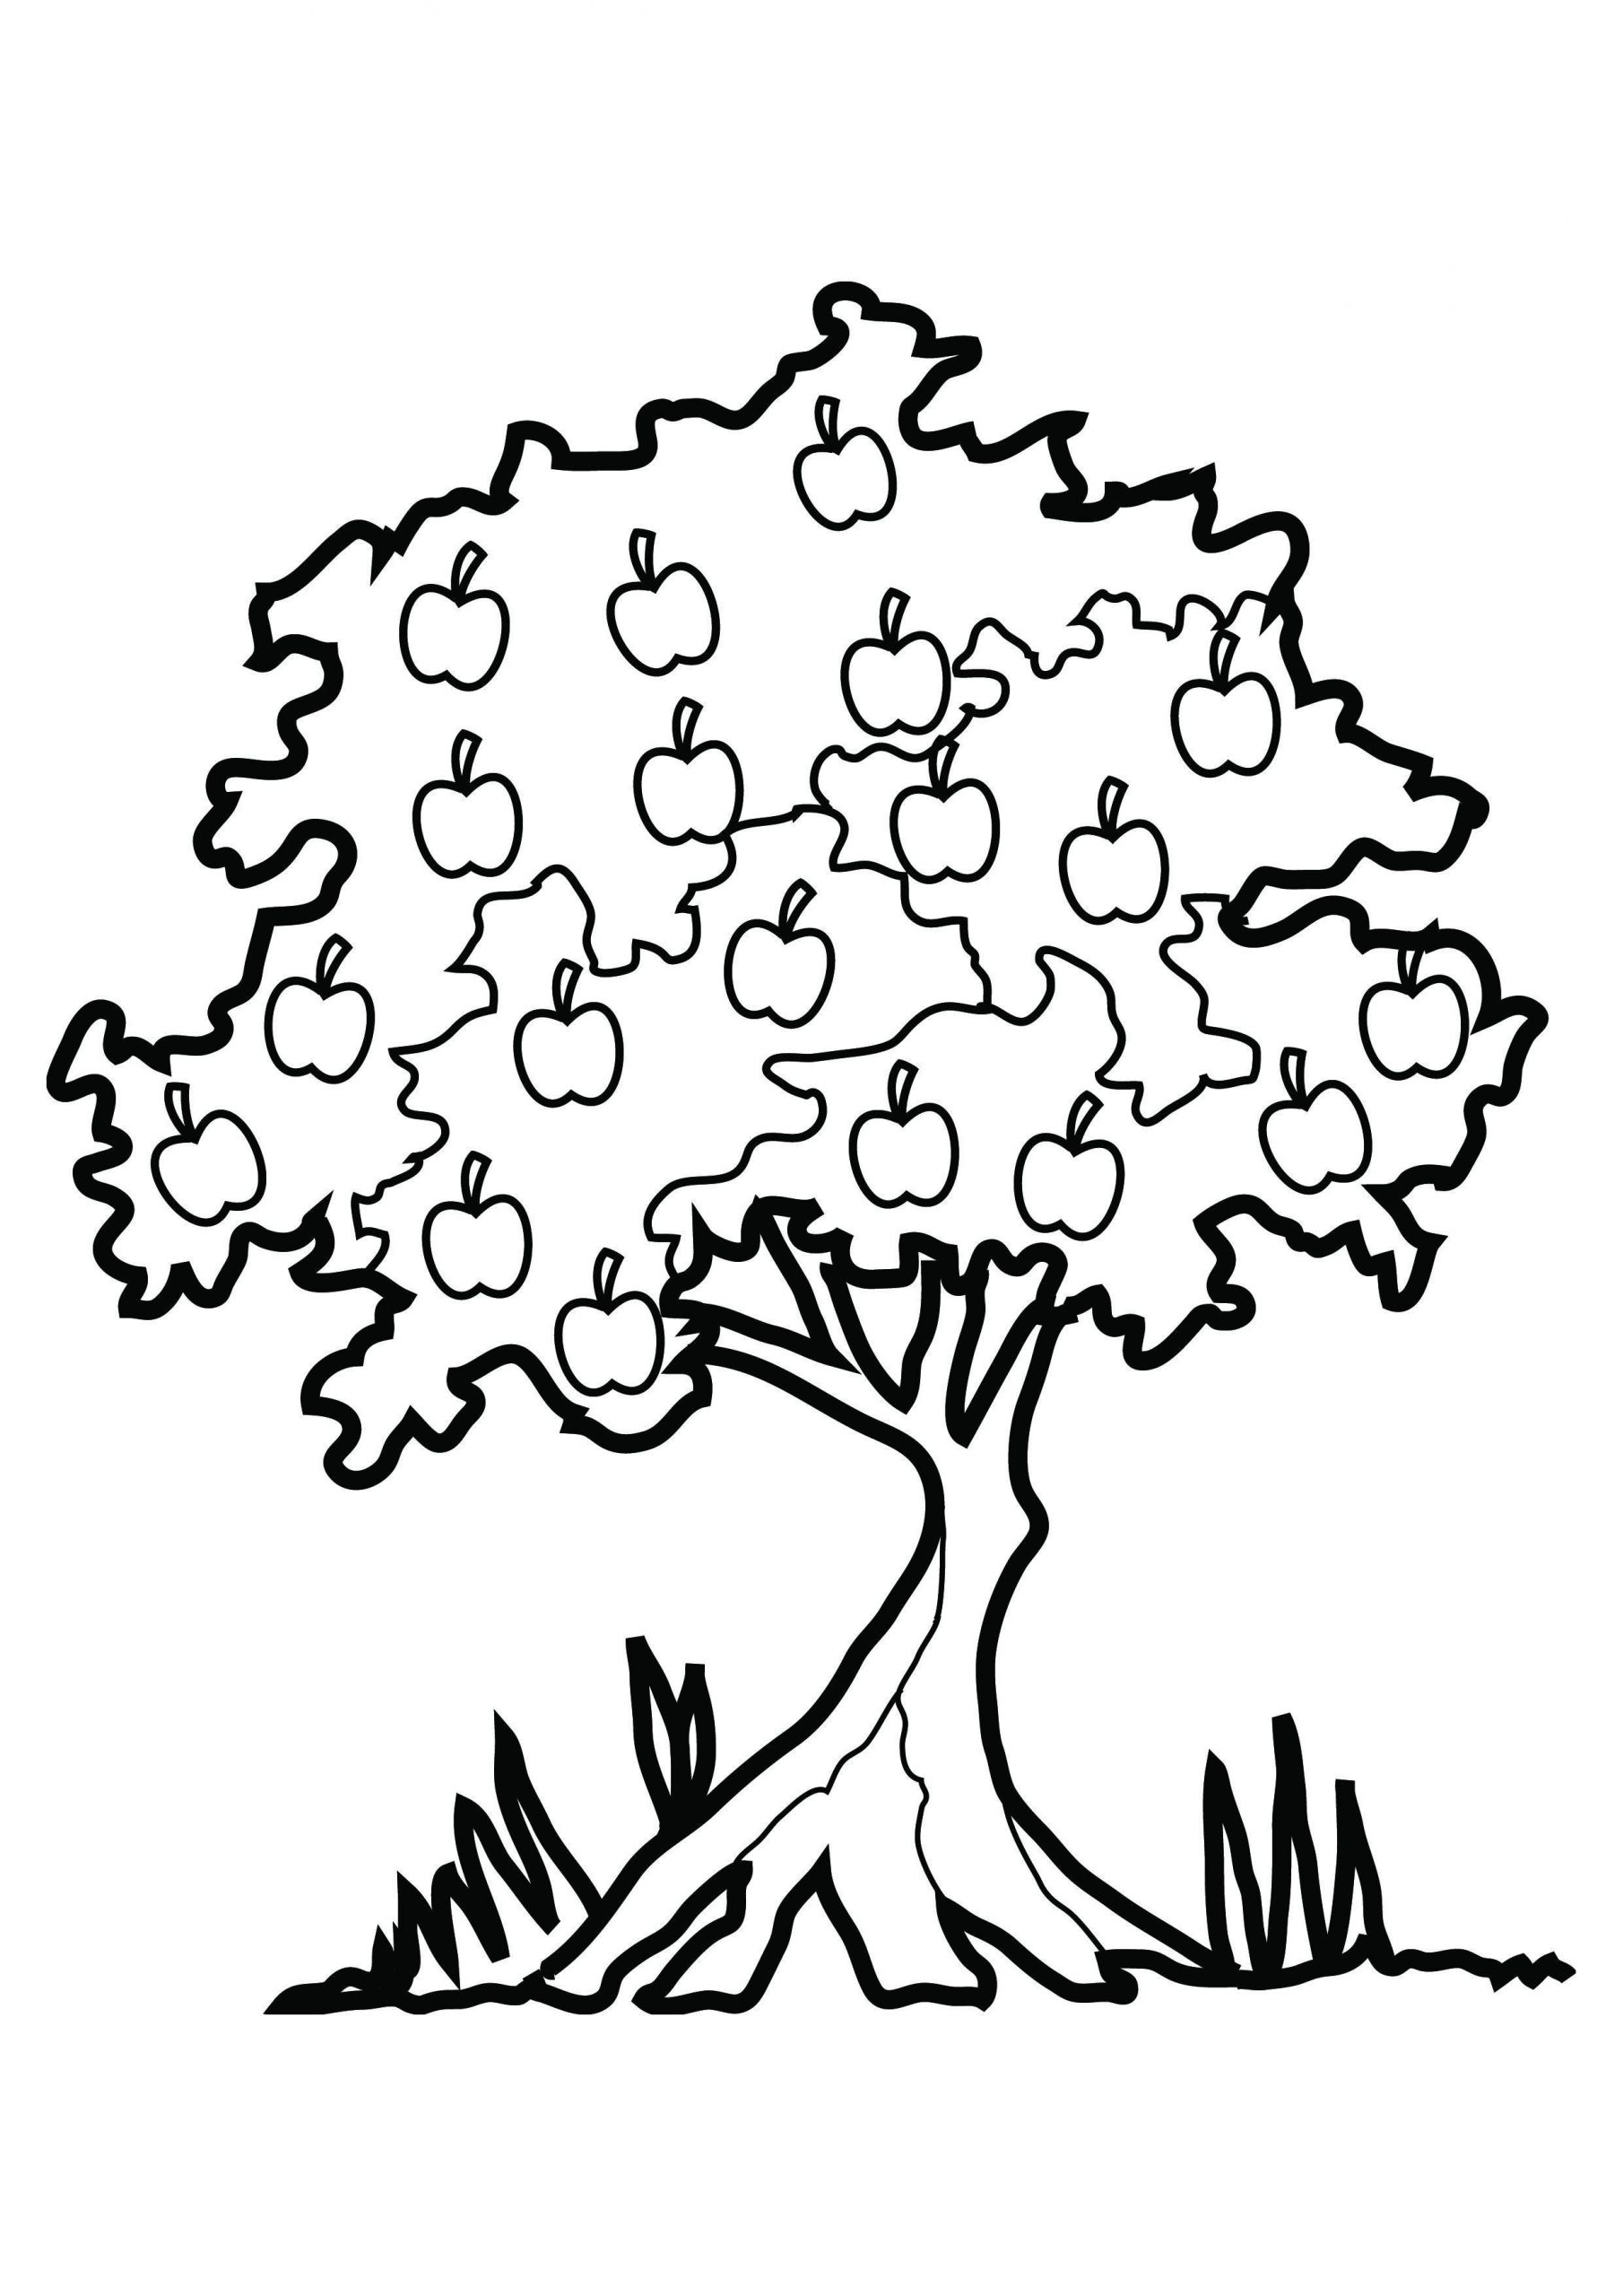 Tree Coloring Pages For Kids
 Free Printable Tree Coloring Pages For Kids